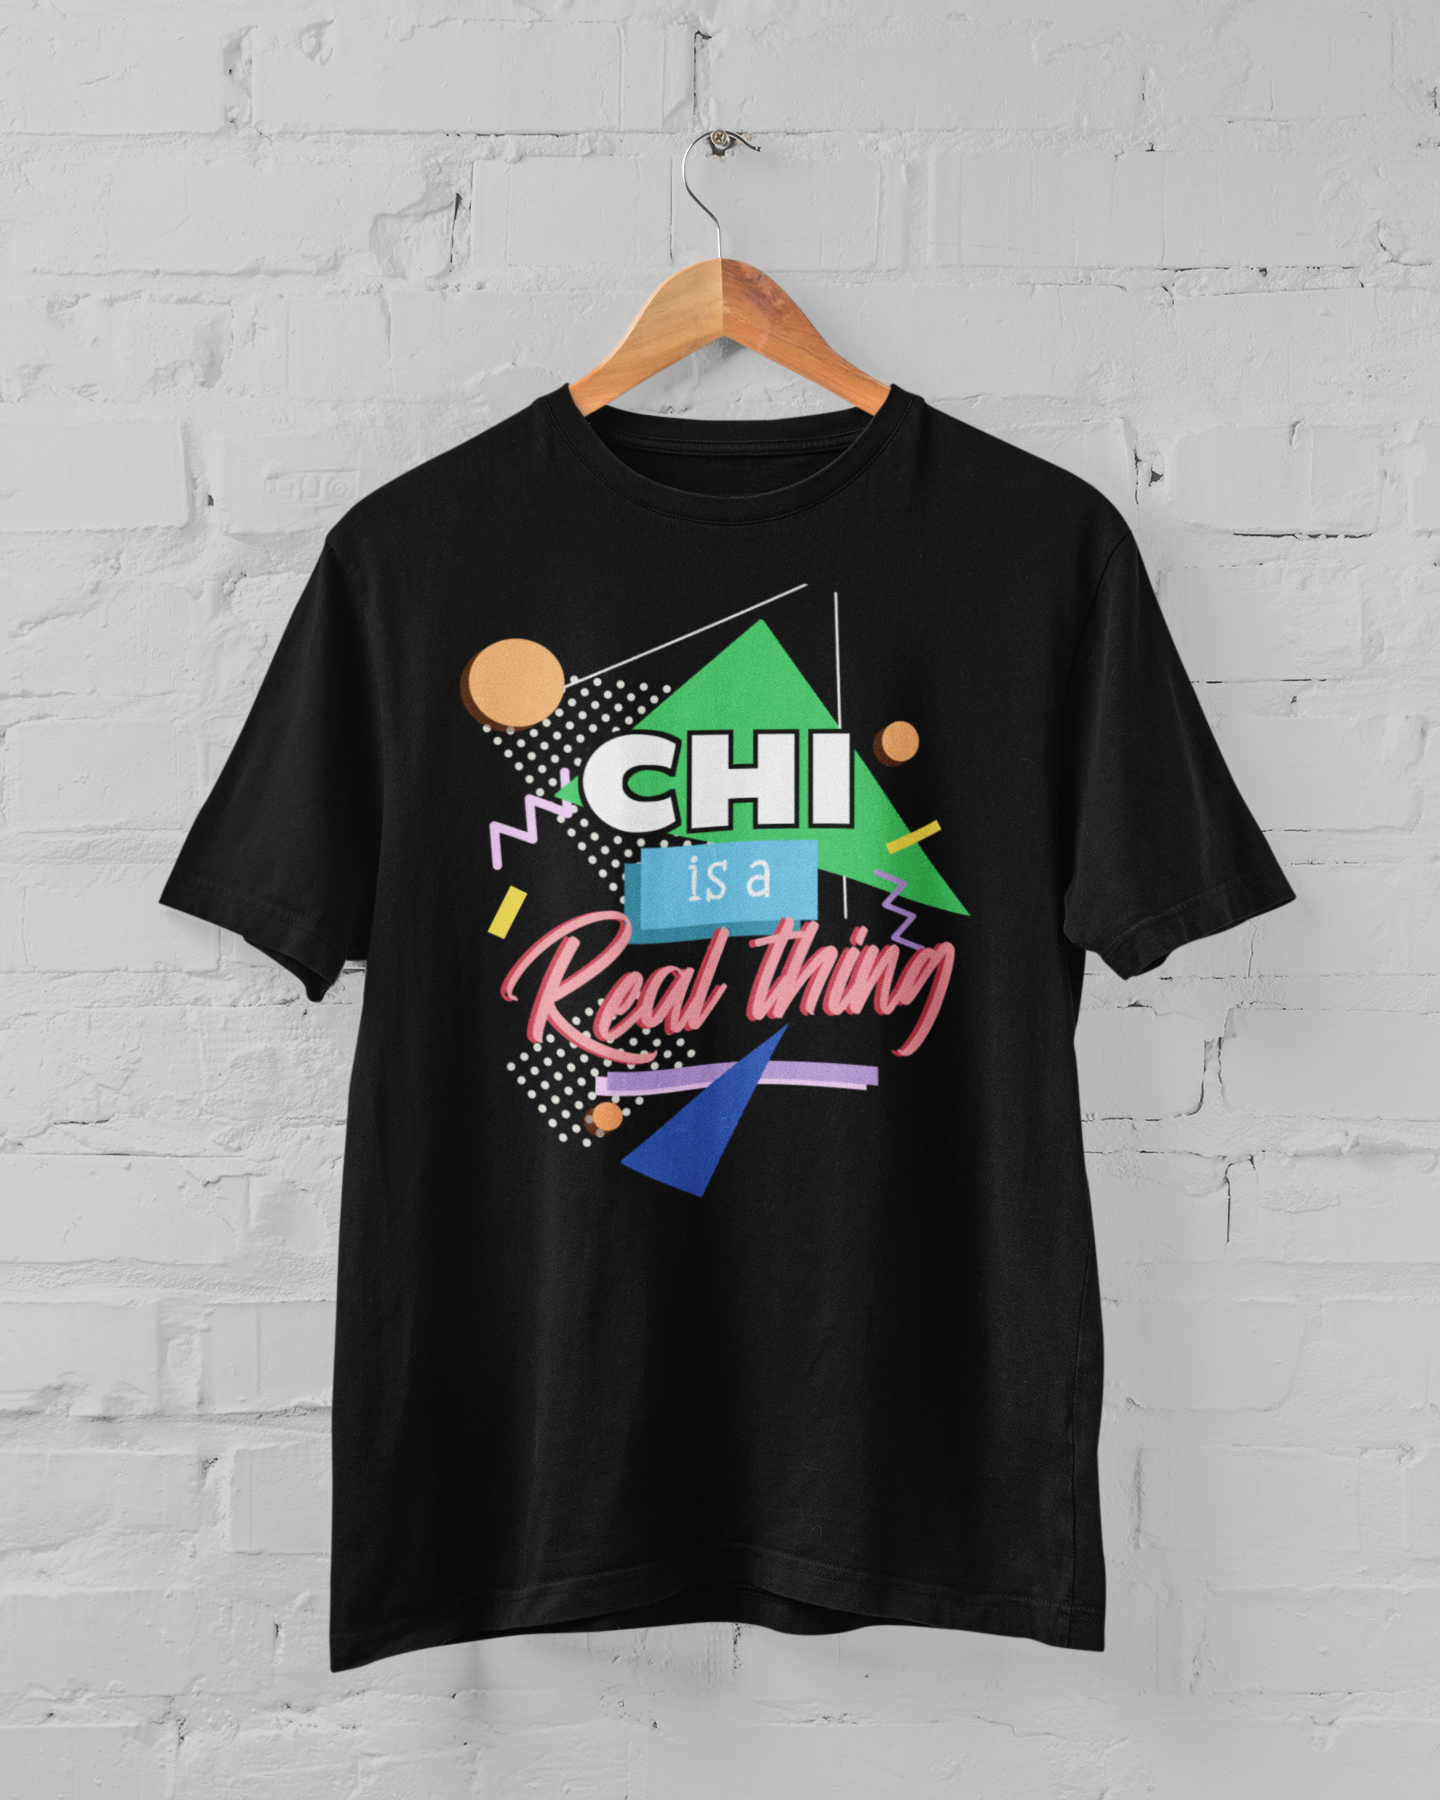 Black t-shirt 'Chi is a real thing' design